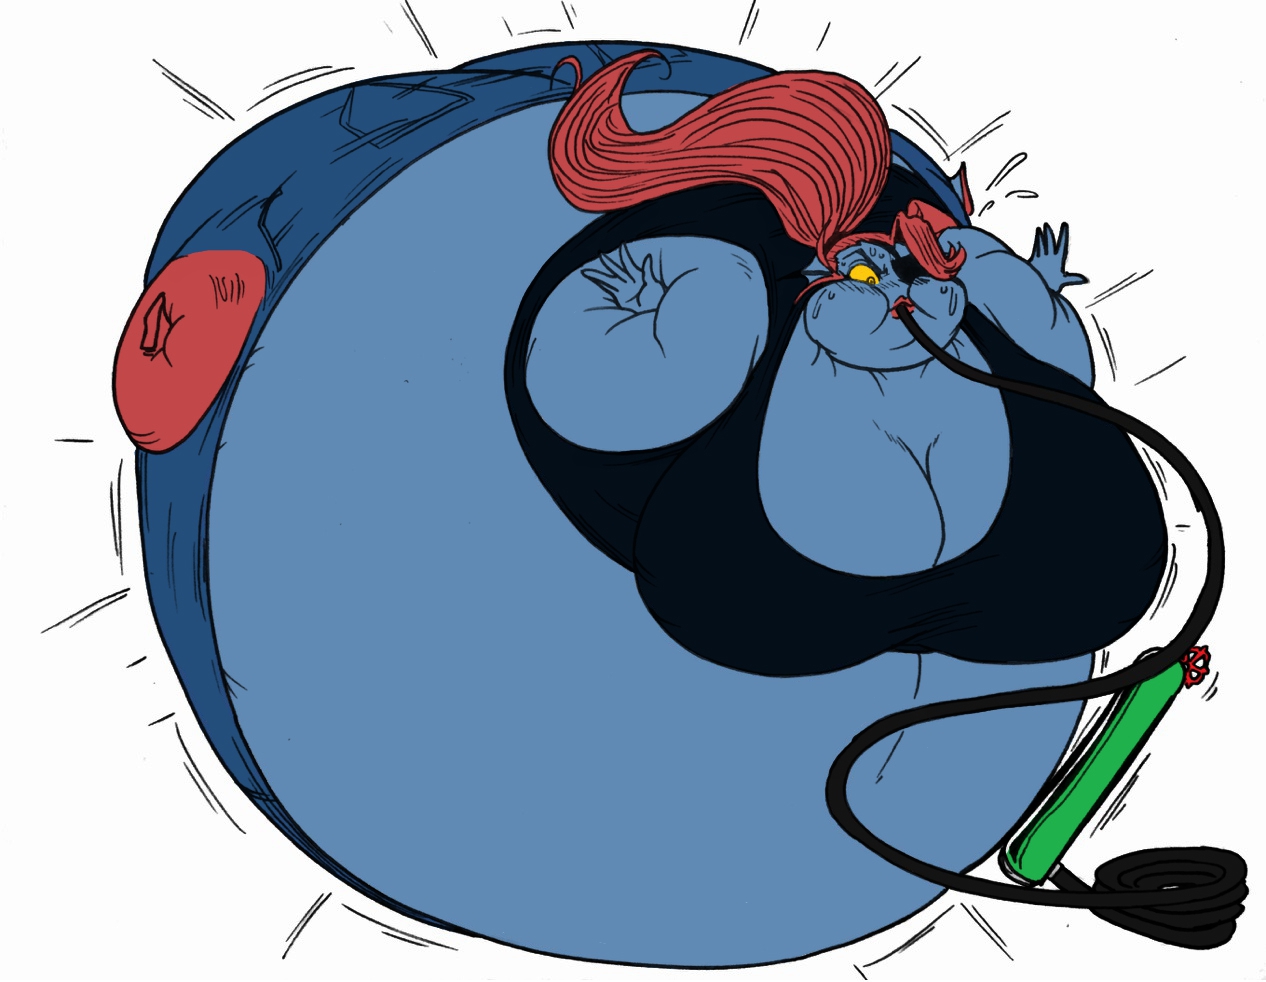 Undyne uber inflated part 2 by Yerkeijfercash colored by the